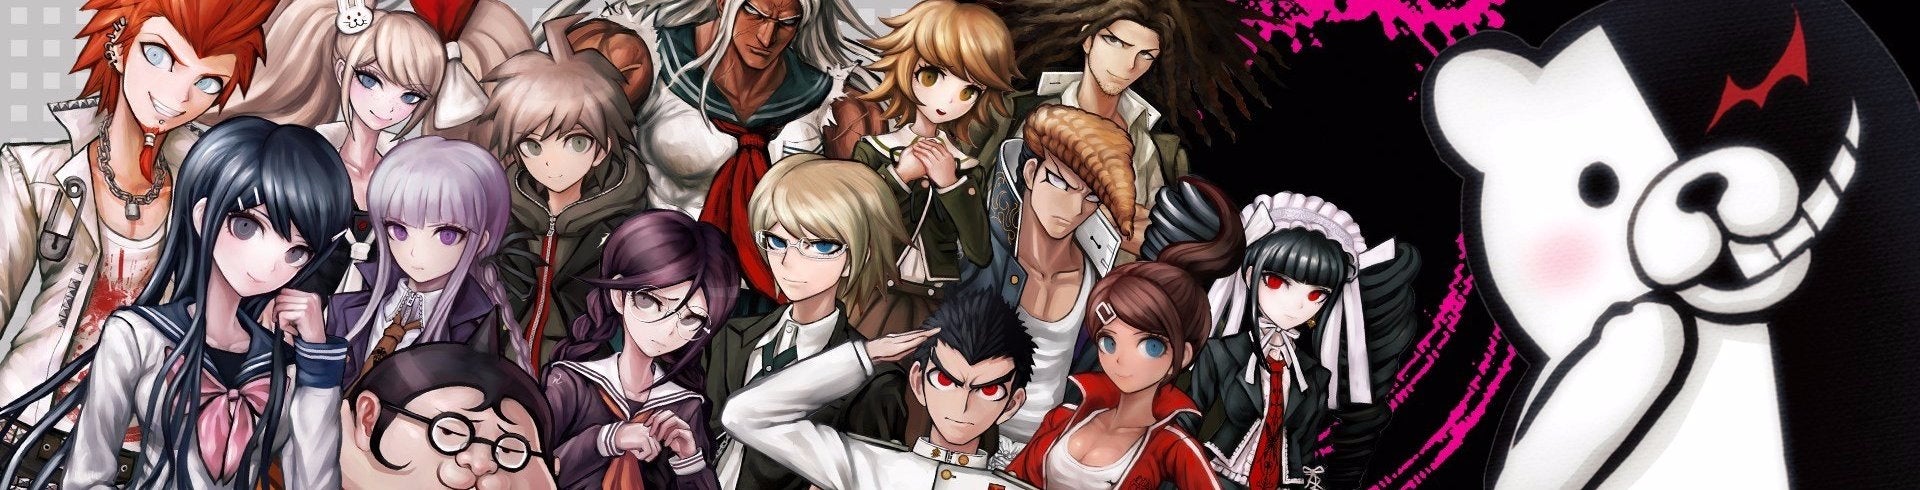 Image for Why is Danganronpa so viciously appealing?